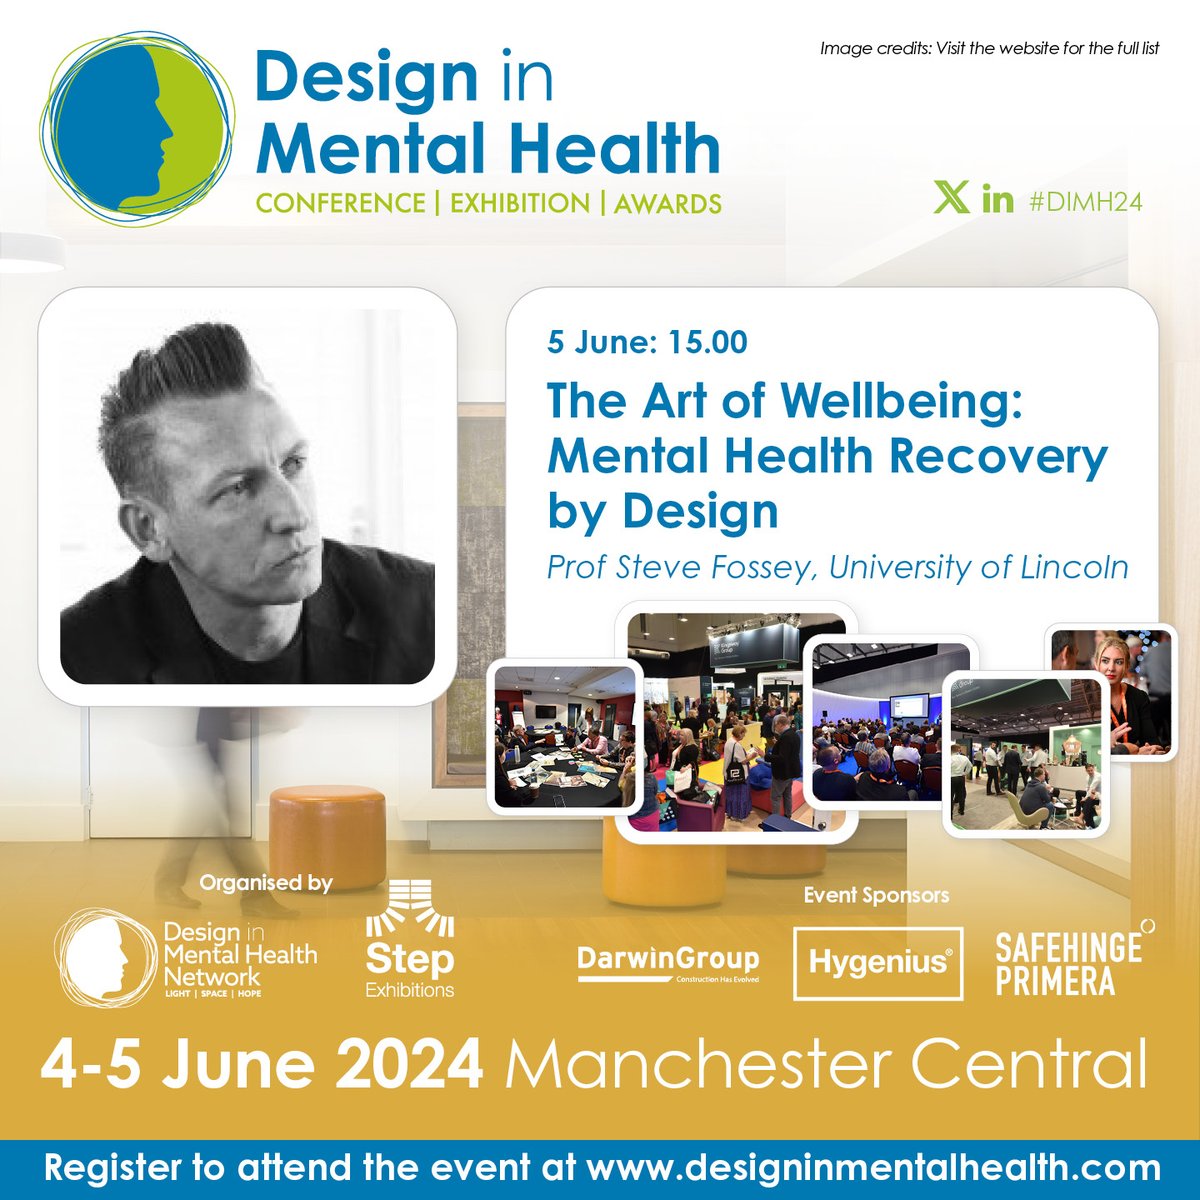 Presenting a 3D model which demonstrates a multi-component approach to mental health recovery by design, Prof. Fossey & his colleague Prof Rachel Baynton will unveil a new approach to healing design @DiMH_event. Registration is open. Book at designinmentalhealth.com #mentalhealth